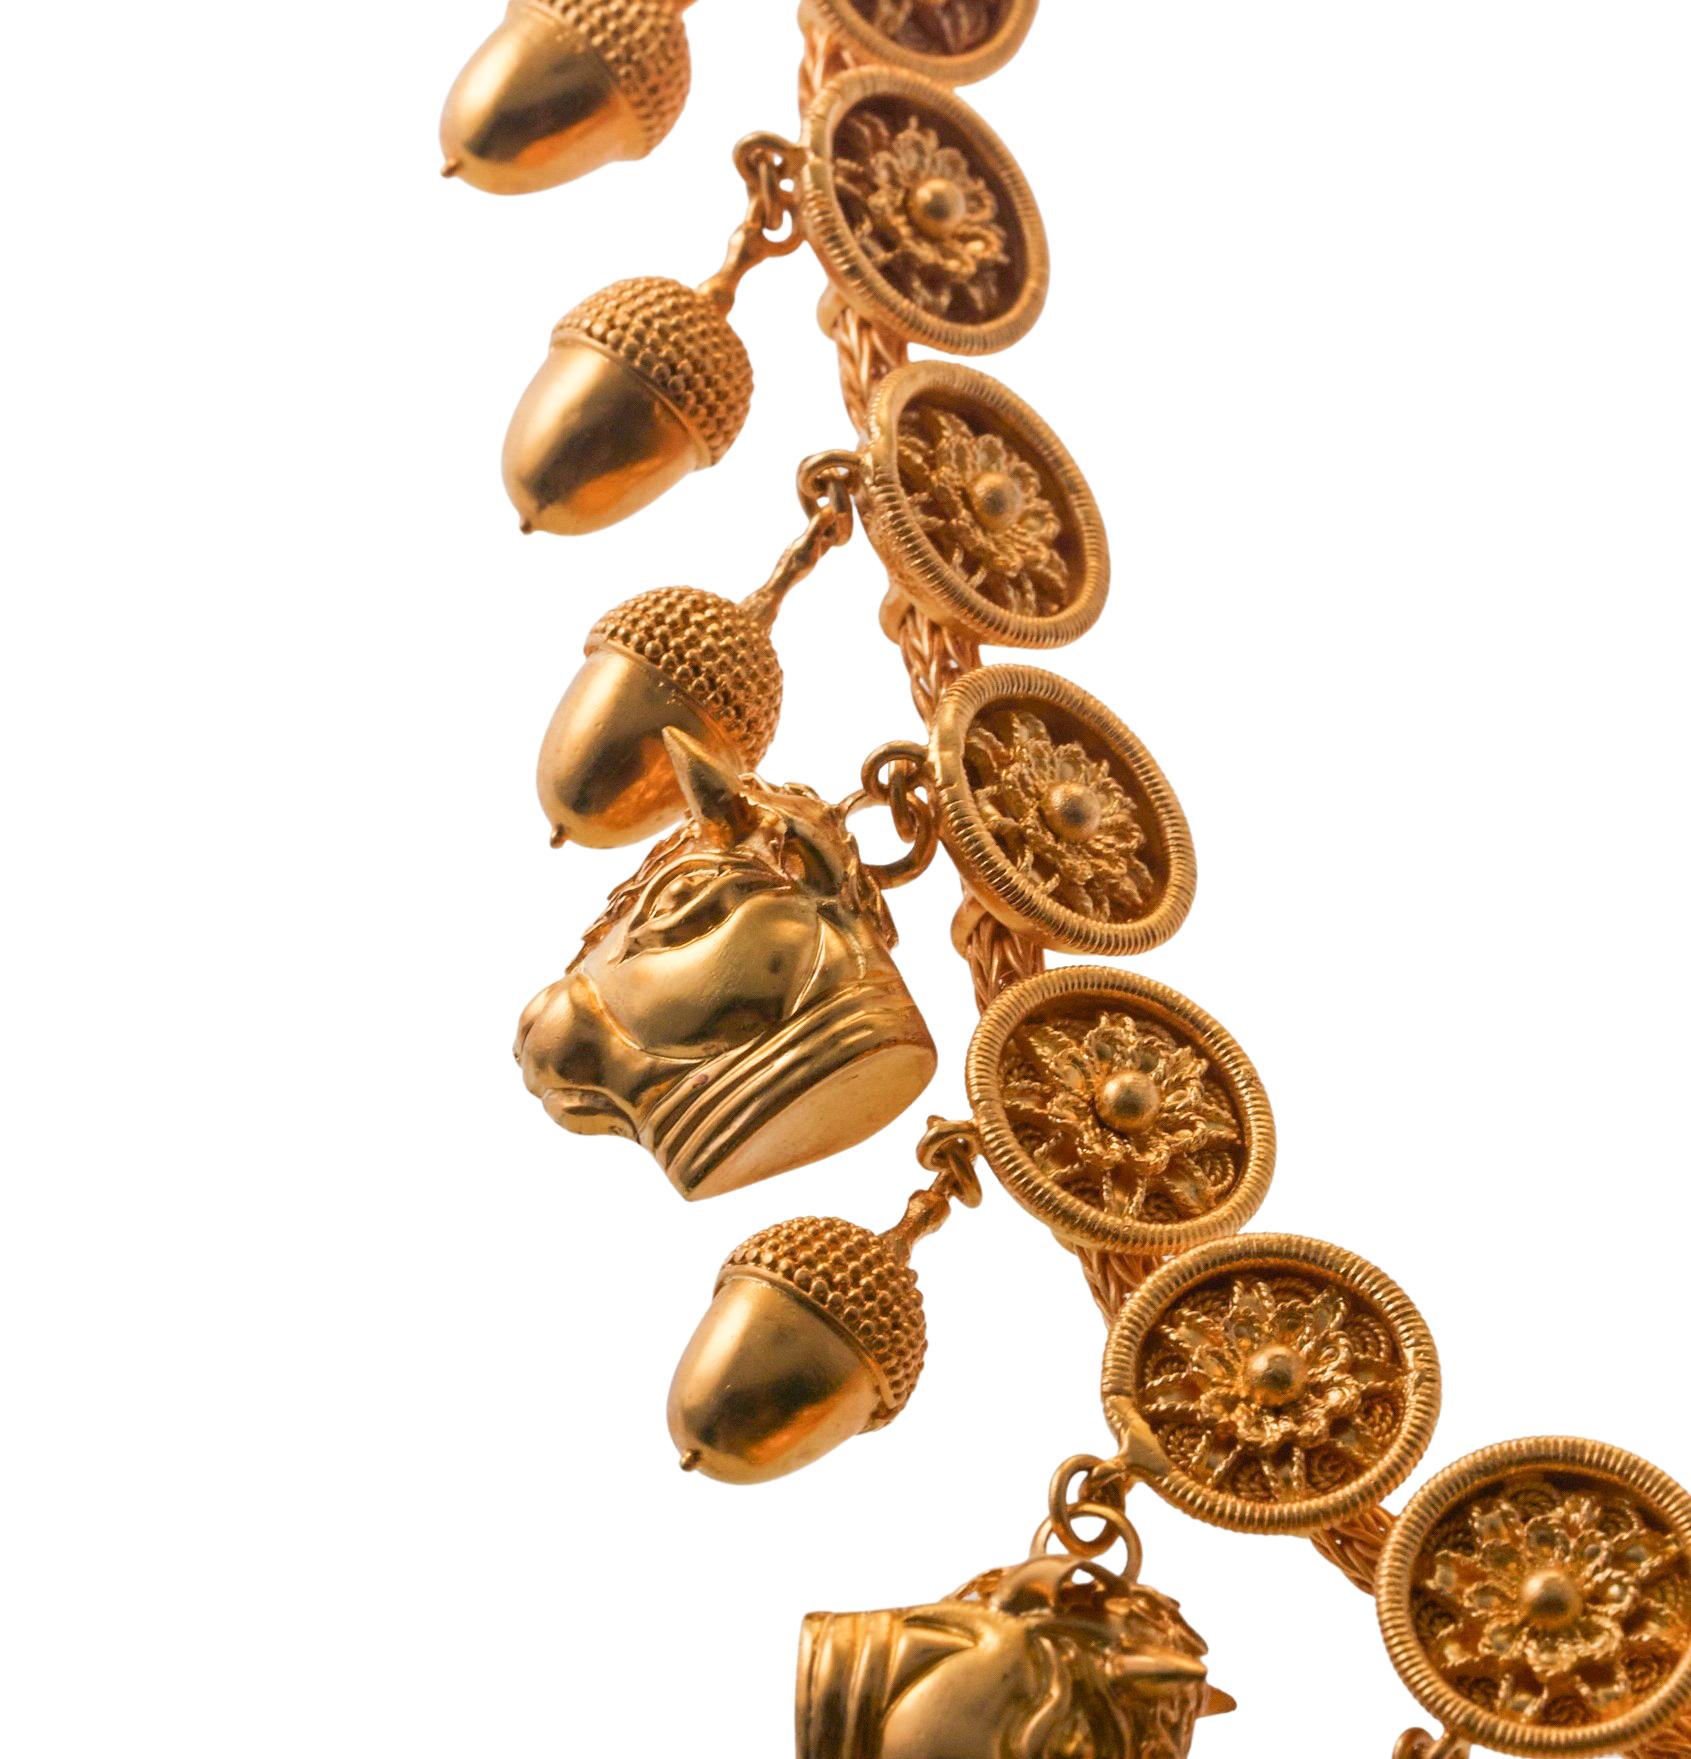 Impressive 18k gold,Etruscan Revival style, acorns and bulls motif necklace by Lalaounis Greece. Necklace measures 16